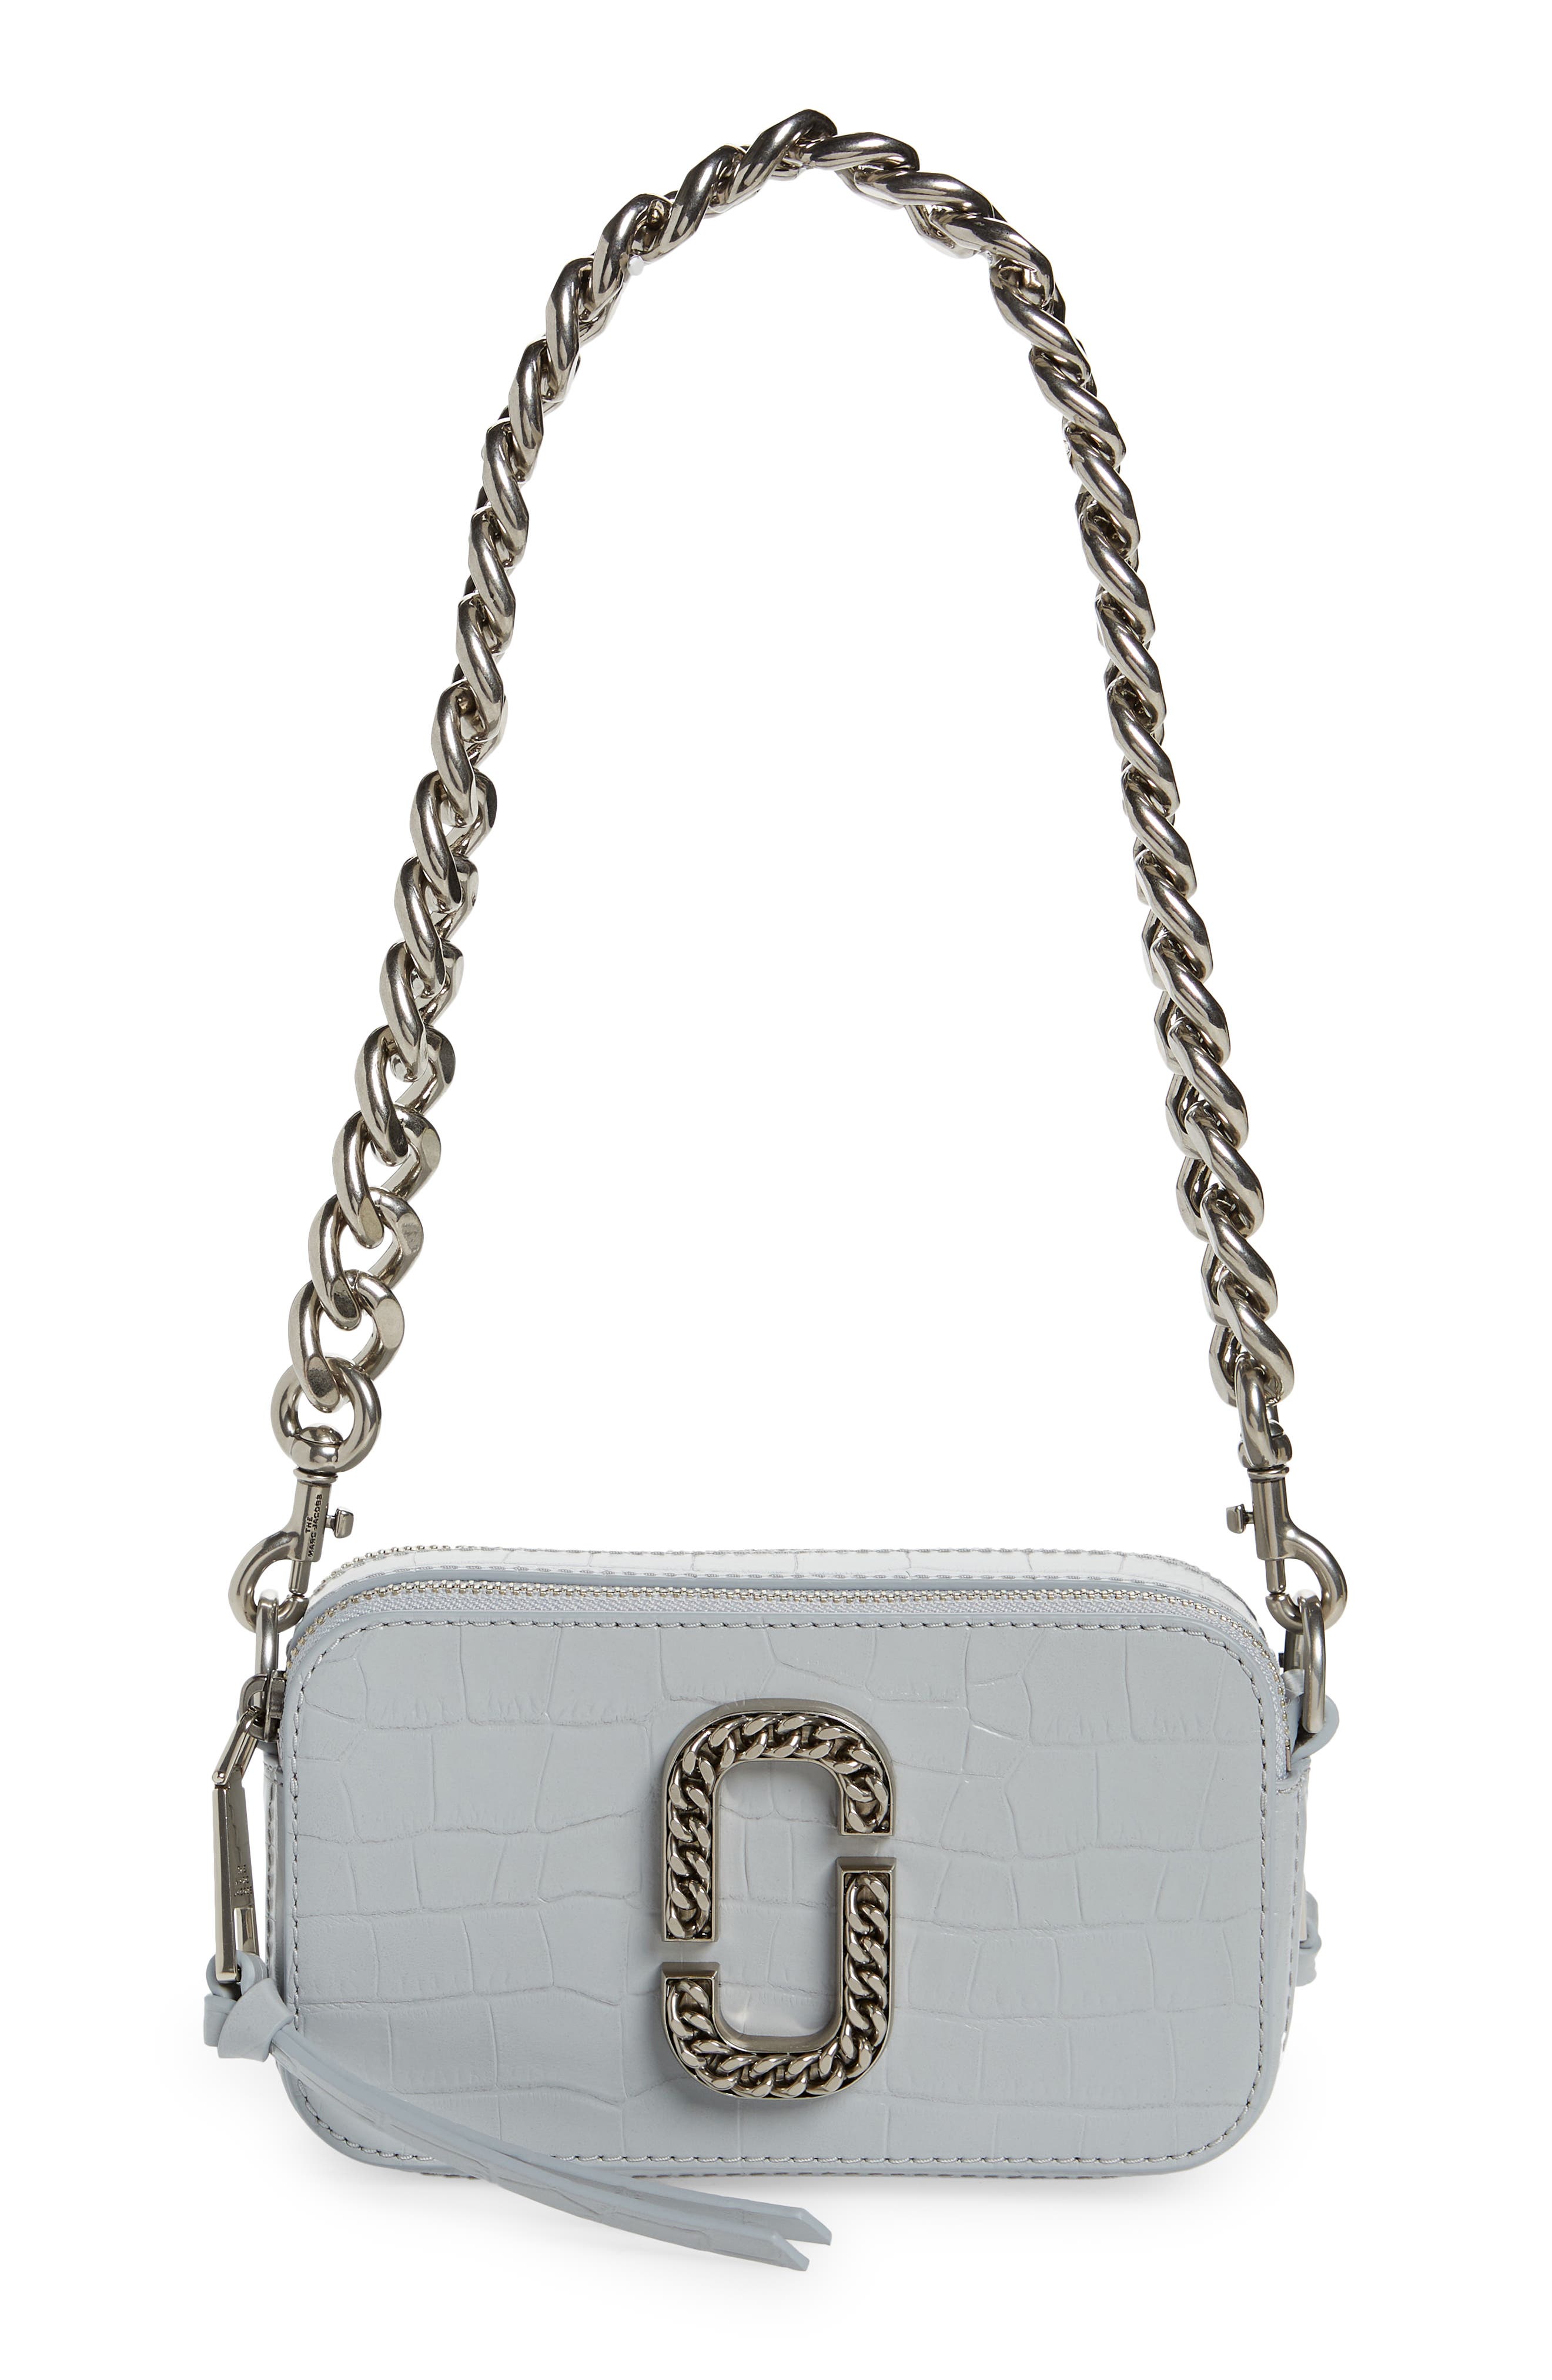 Marc Jacobs Snapshot Crossbody Bag in Quarry at Nordstrom